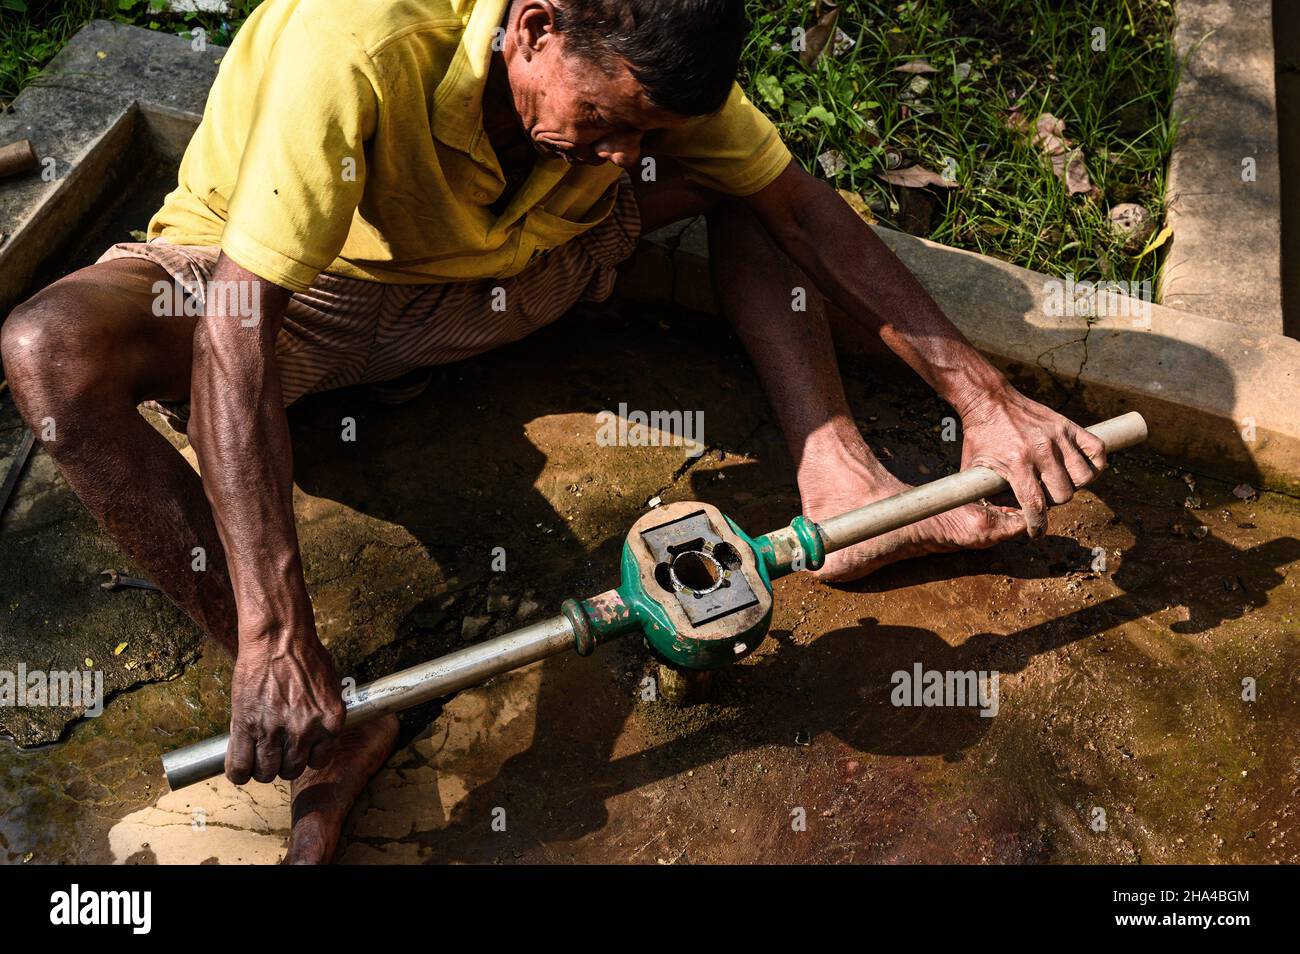 December 8, 2021, Tehatta, West Bengal, India: A recent report published by the Reserve Bank of India (RBI) shows that the daily wage of rural workers in West Bengal is way below the national average. A worker is repairing a tubewell (hand pump) at Tehatta, West Bengal. (Credit Image: © Soumyabrata Roy/Pacific Press via ZUMA Press Wire) Stock Photo